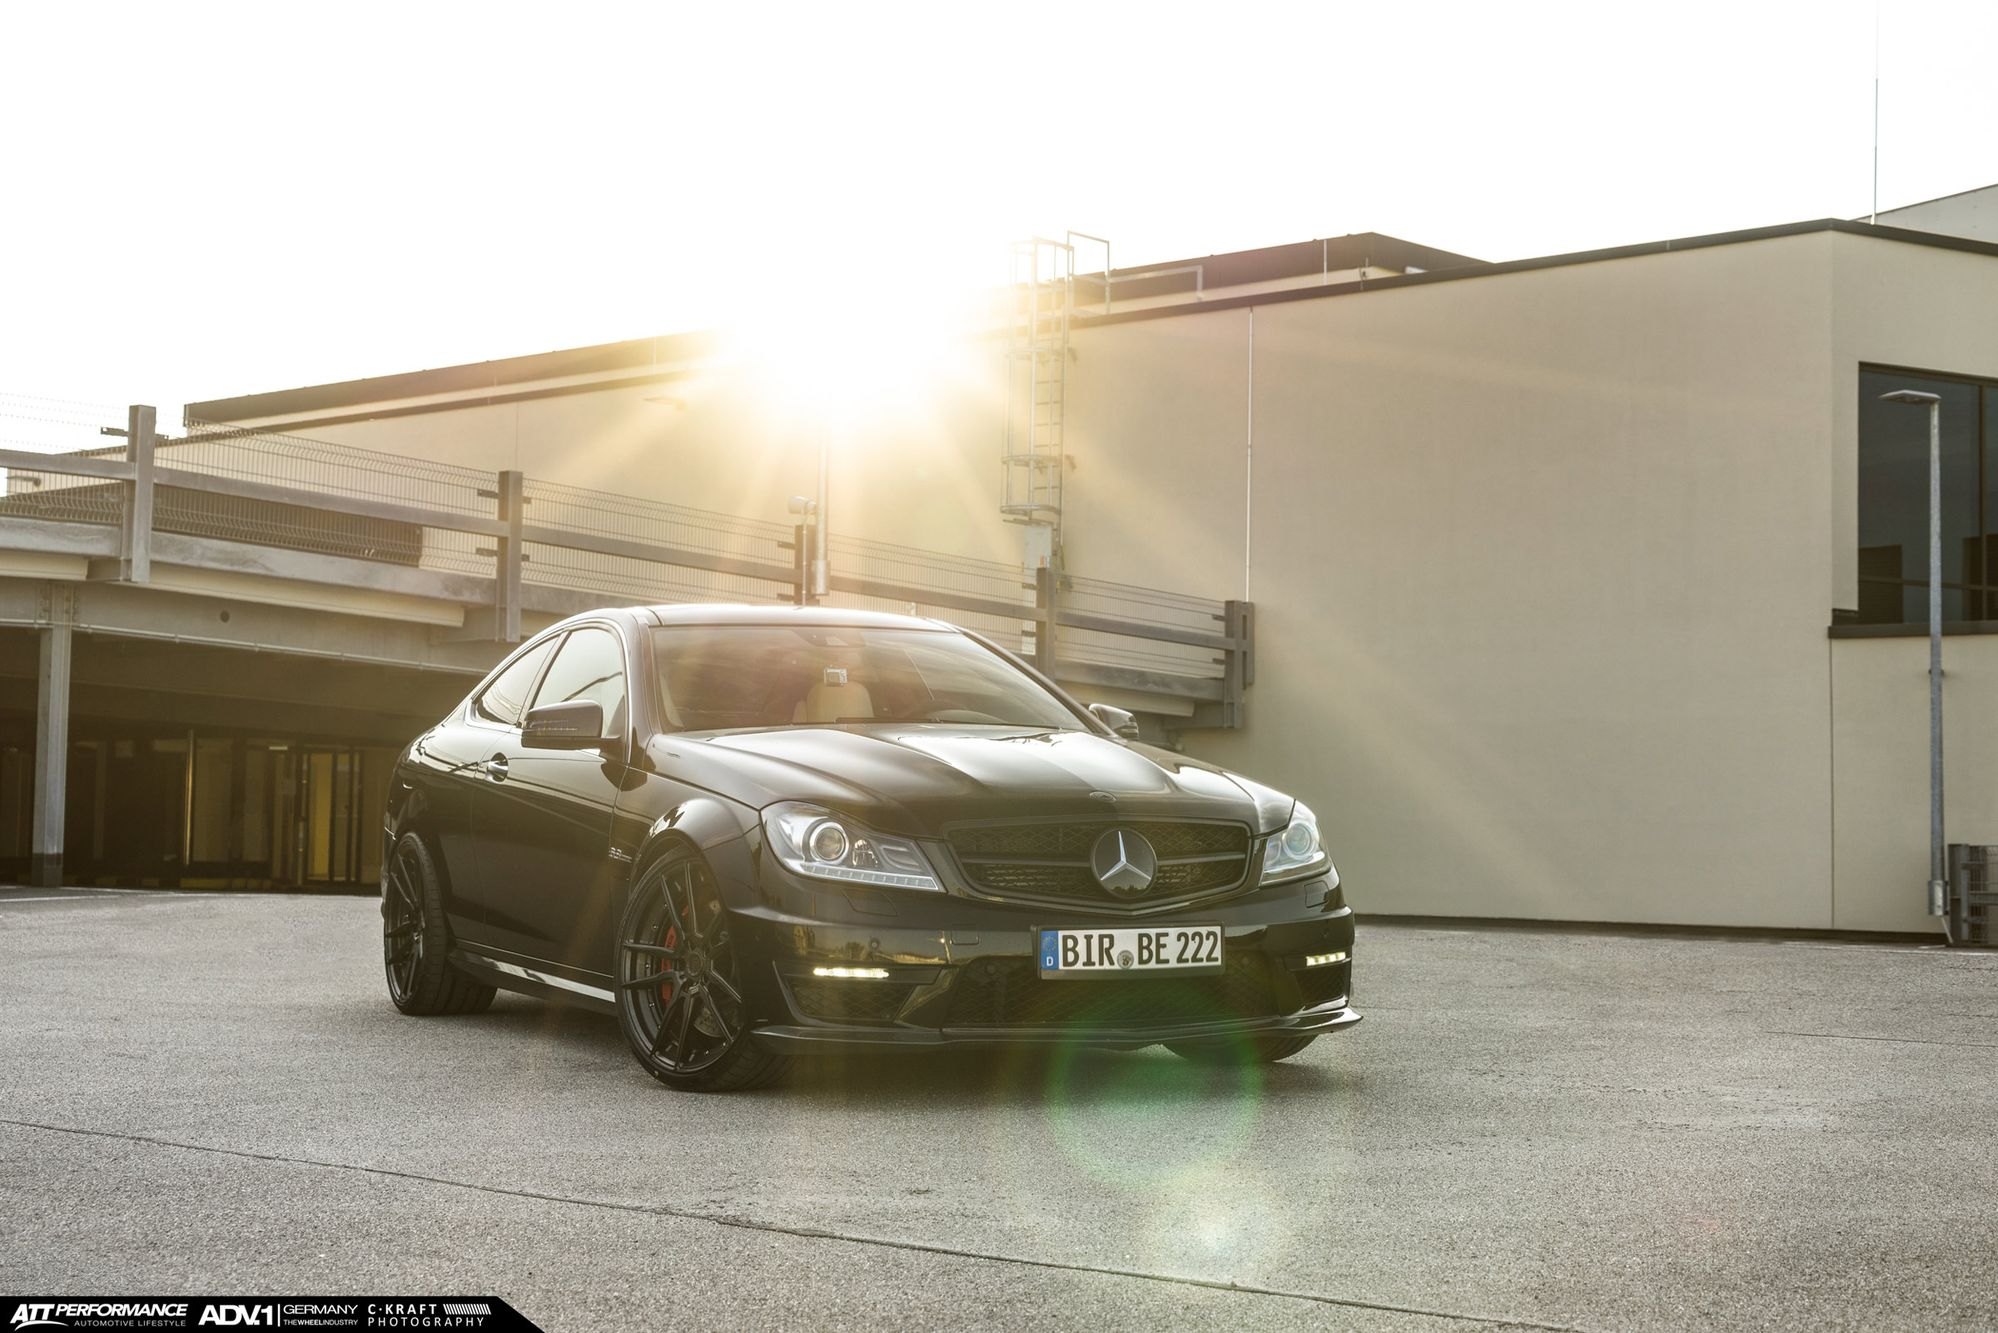 Wide Fenders on Mercedes C63 AMG Coupe - Photo by ADV.1